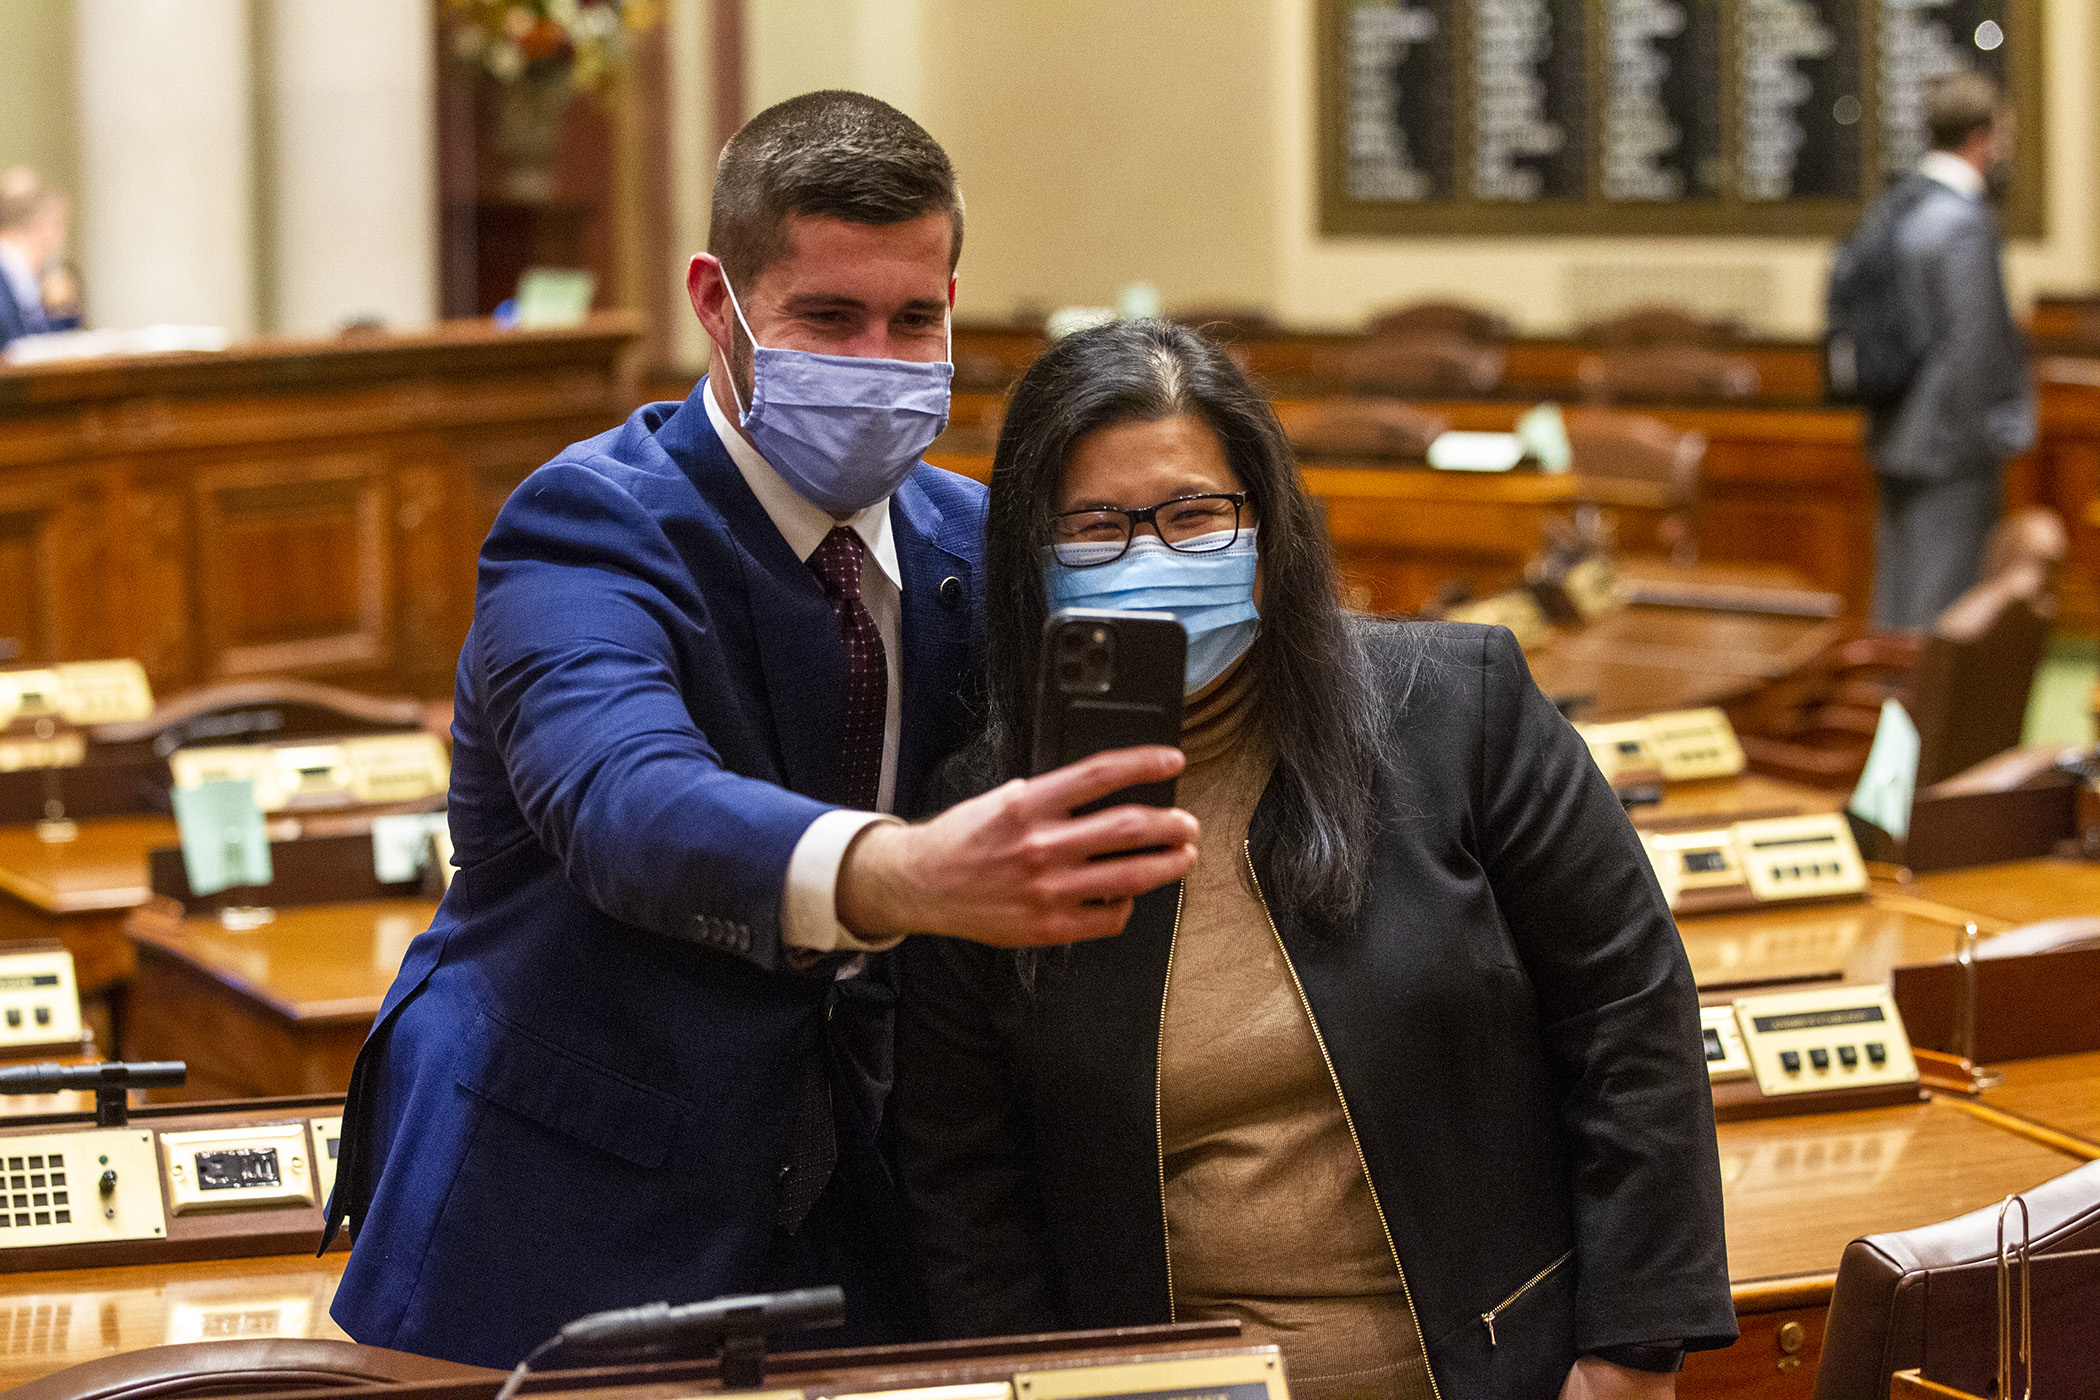 Rep. Dan Wolgamott and Rep. Kaohly Her take a selfie at the conclusion of the House Floor session on opening day of the 2021 session Jan. 5 Photo by Paul Battaglia